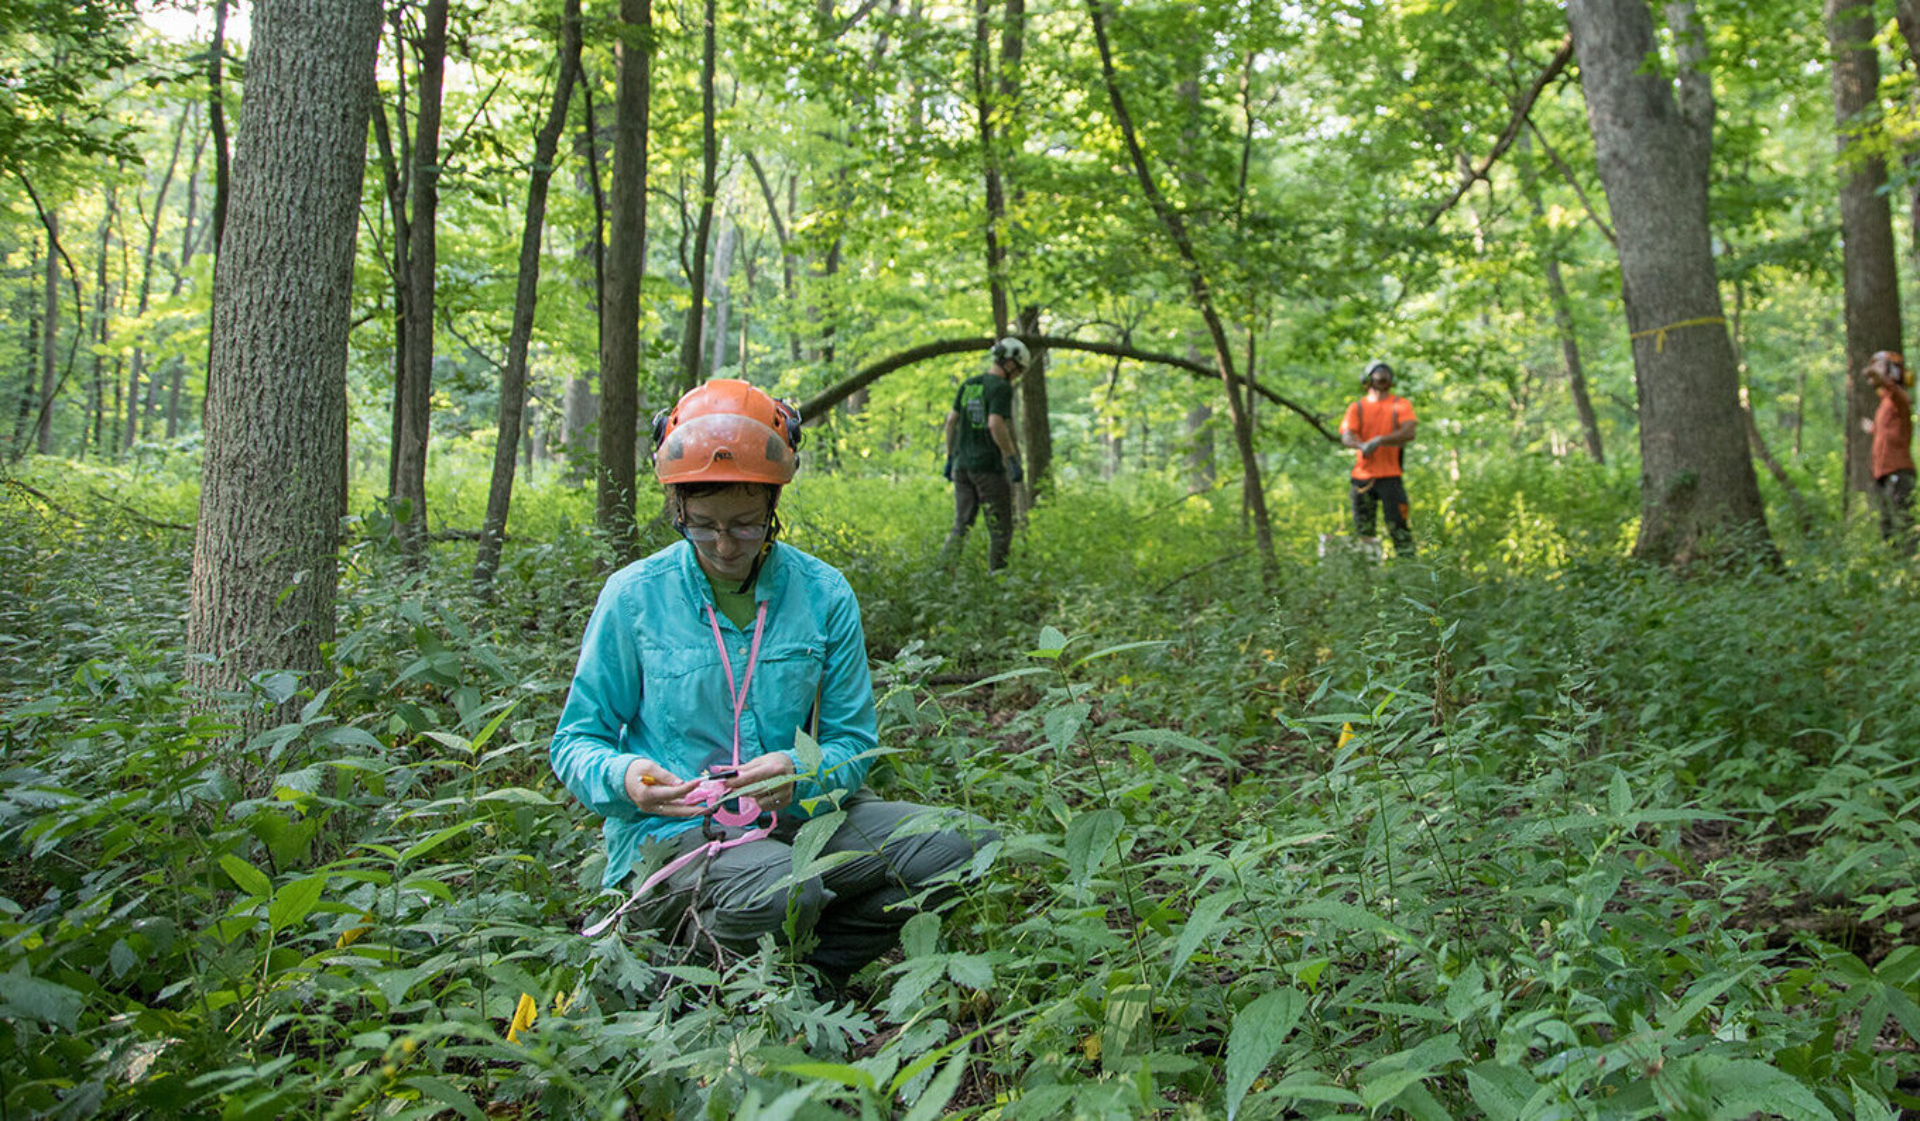 Forest ecologists working onsite in the woods at the Morton Arboretum.